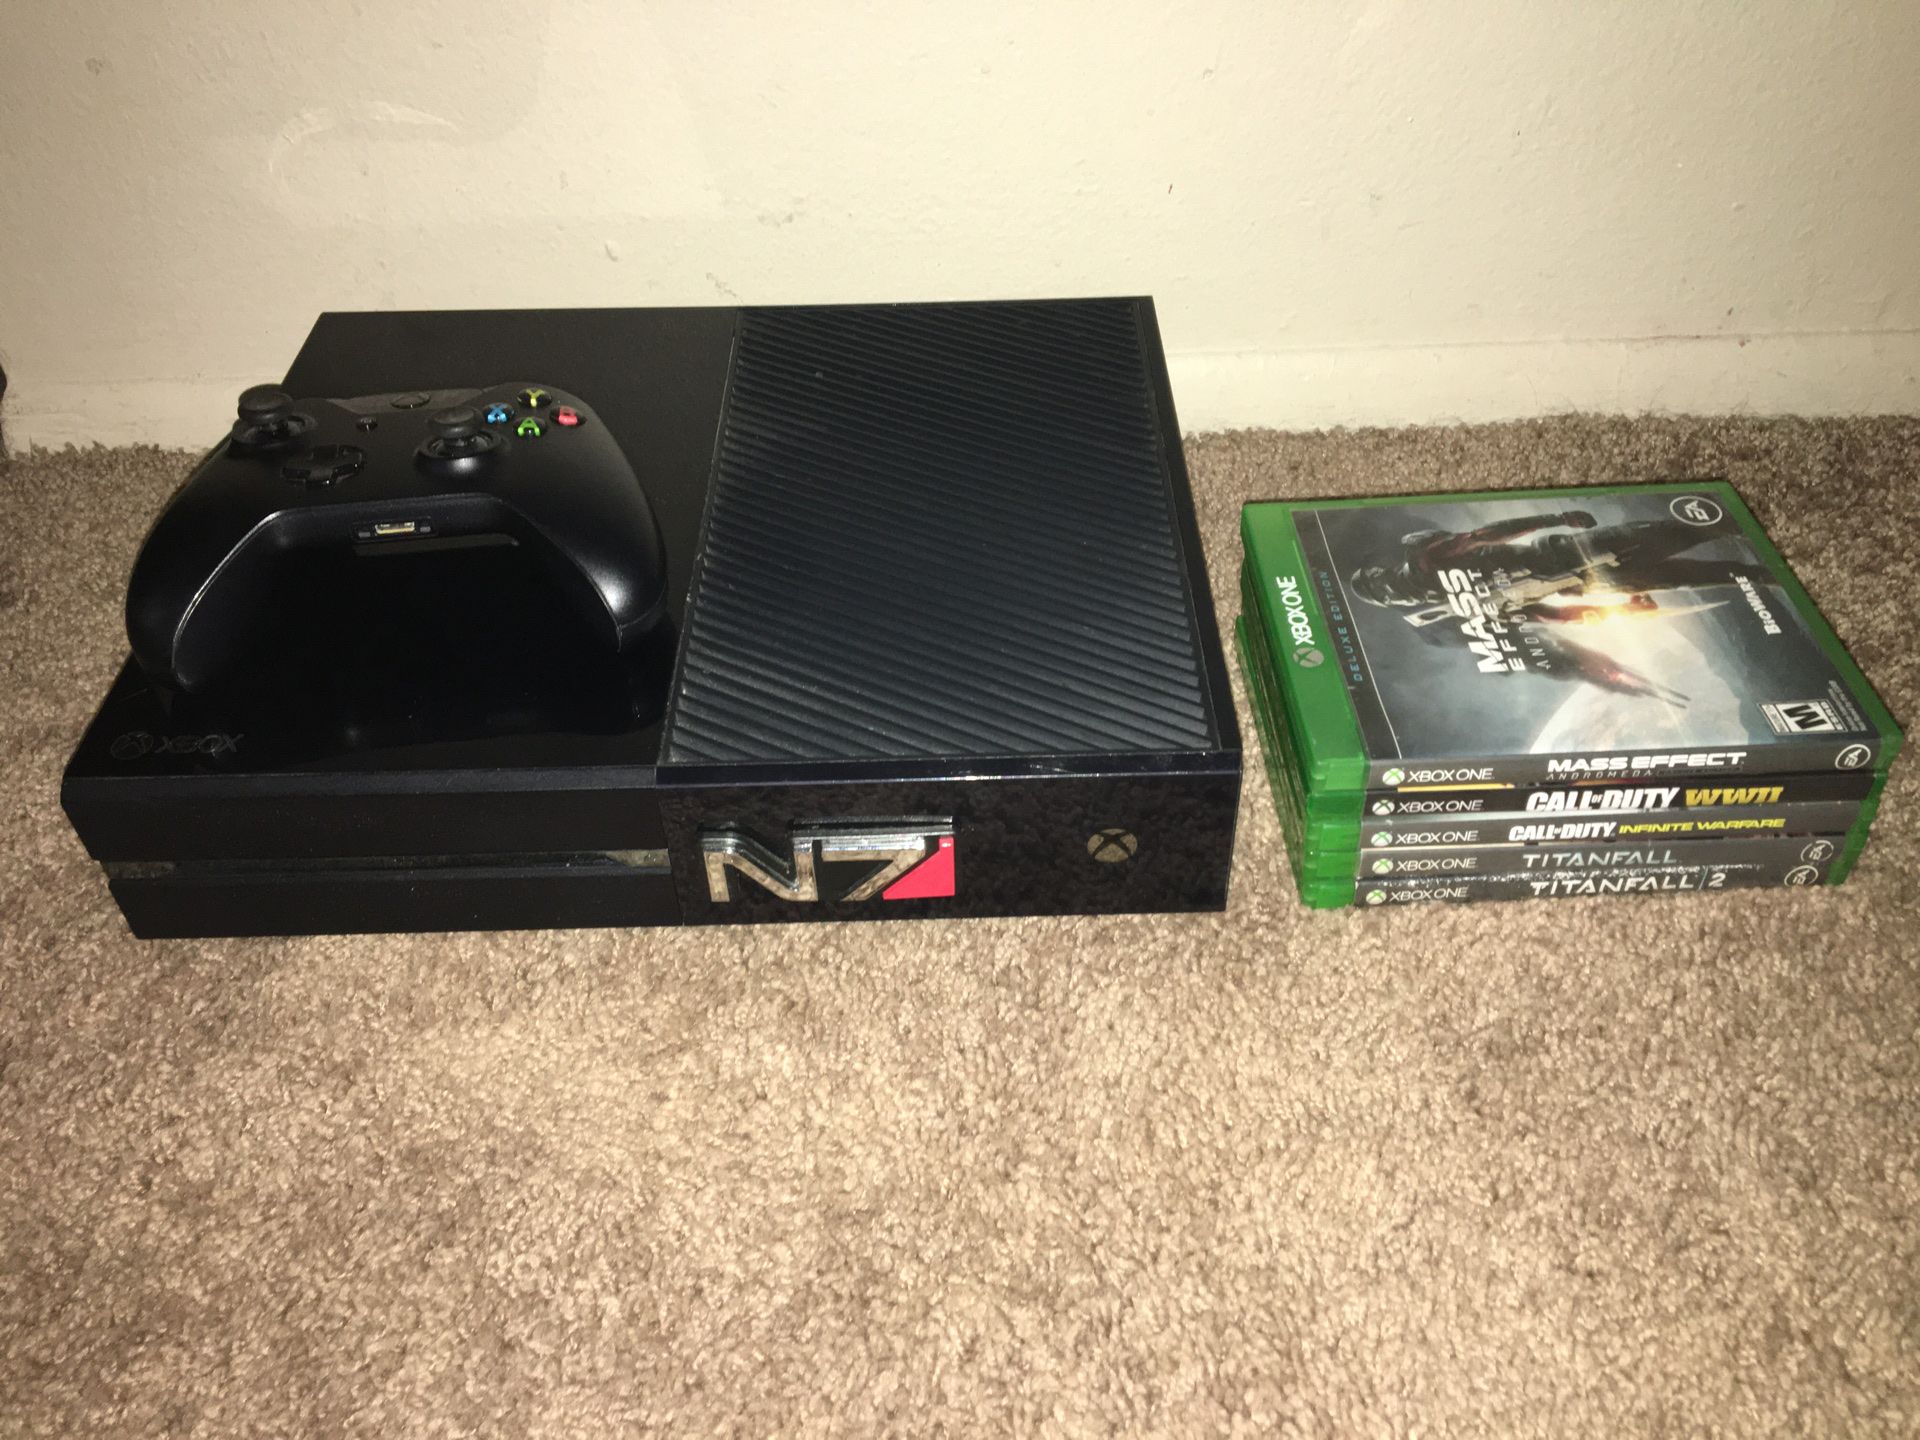 Xbox One with 5 games and 1 wireless control